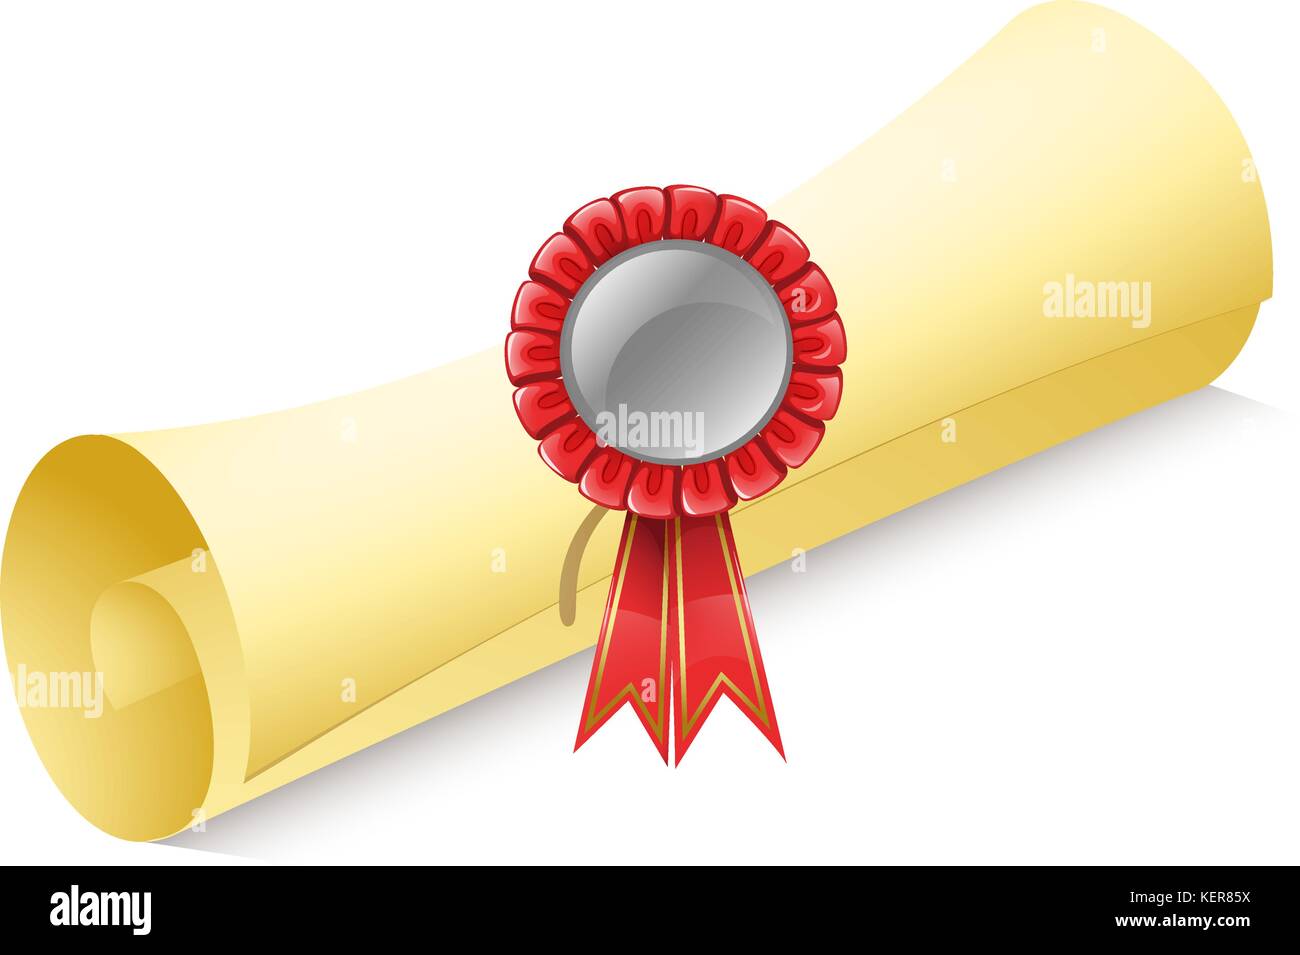 Diploma Paper Scroll With Red Ribbon Isolated On White Background 3d  Rendering Stock Photo - Download Image Now - iStock